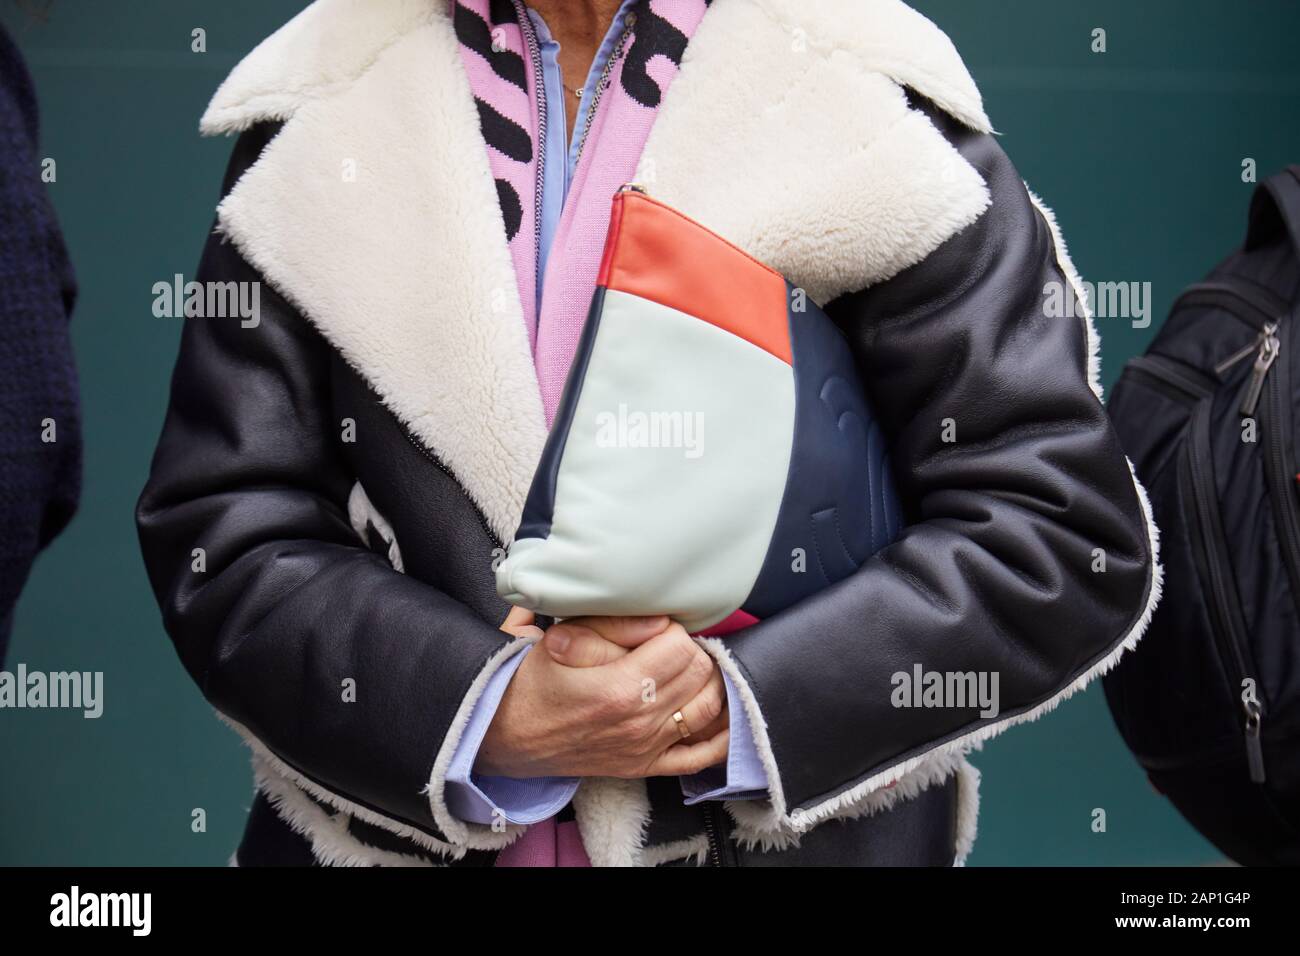 MILAN, ITALY - JANUARY 14, 2019: Woman with blue, orange and white Chanel leather bag and sheepskin jacket before Marco de Vincenzo fashion show, Mila Stock Photo